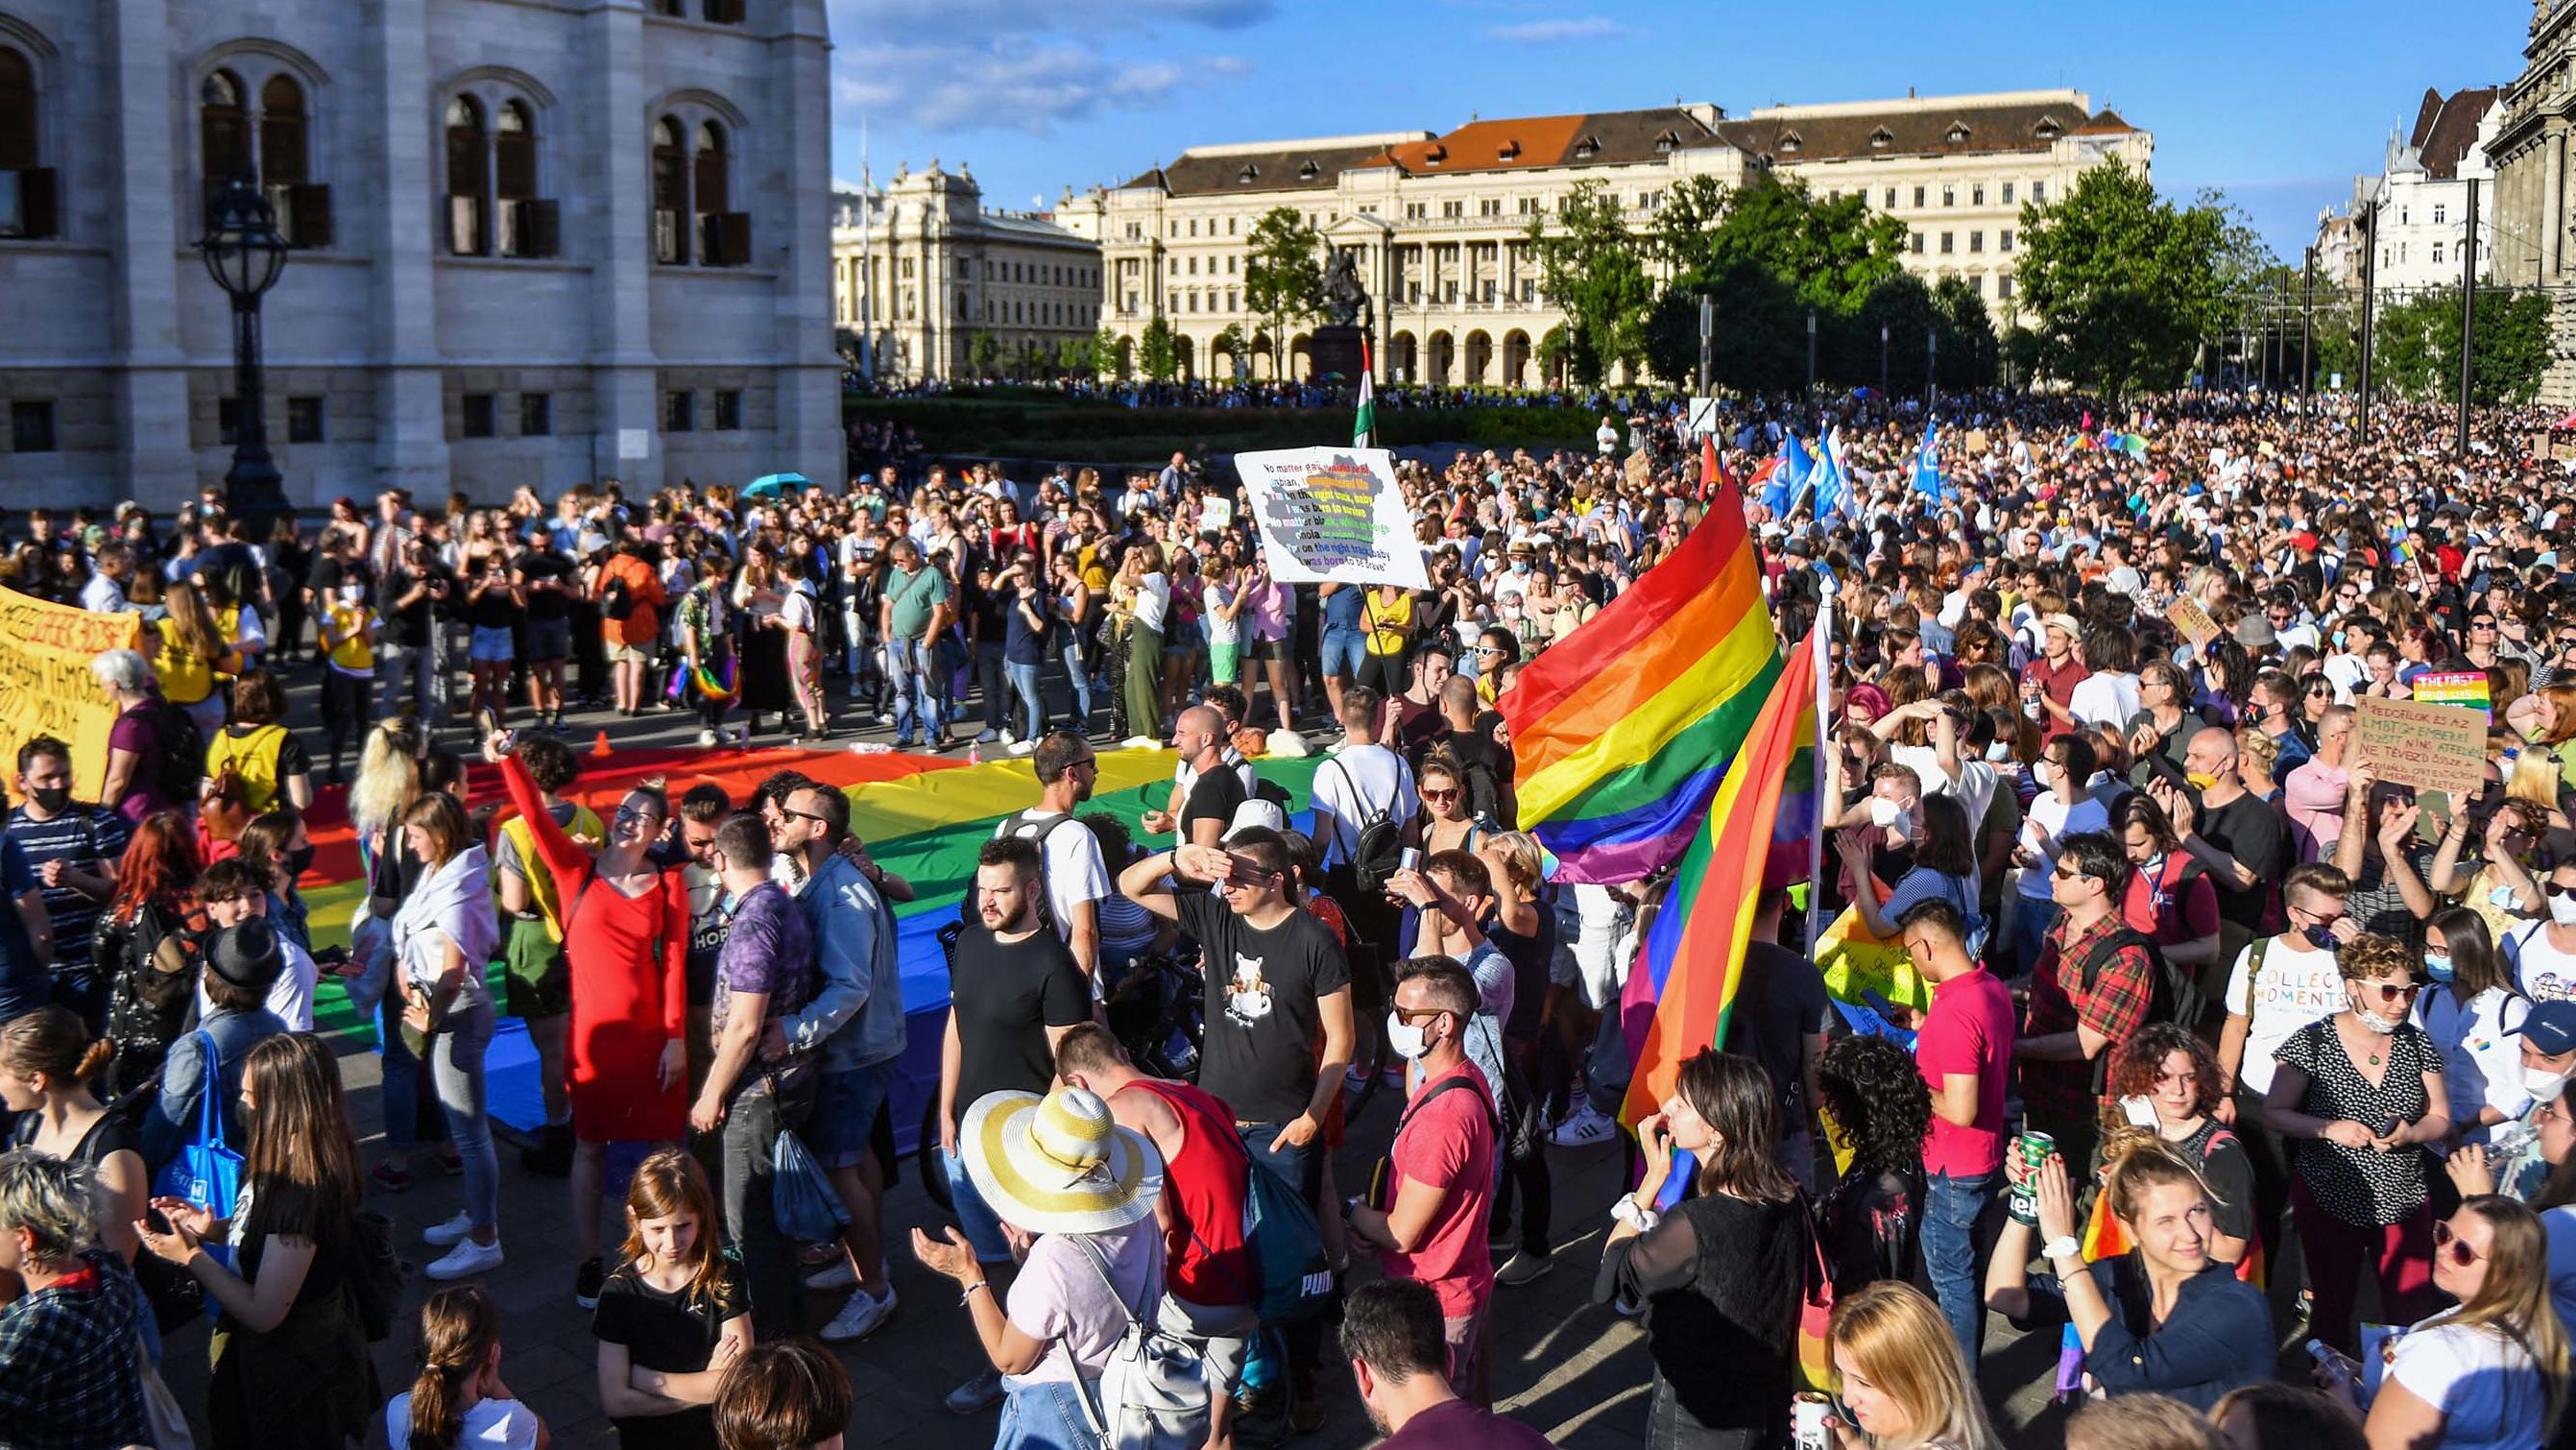 Participants gather near the Parliament building in Budapest on June 14, during a demonstration against the Hungarian government's draft bill seeking to ban the "promotion" of homosexuality.